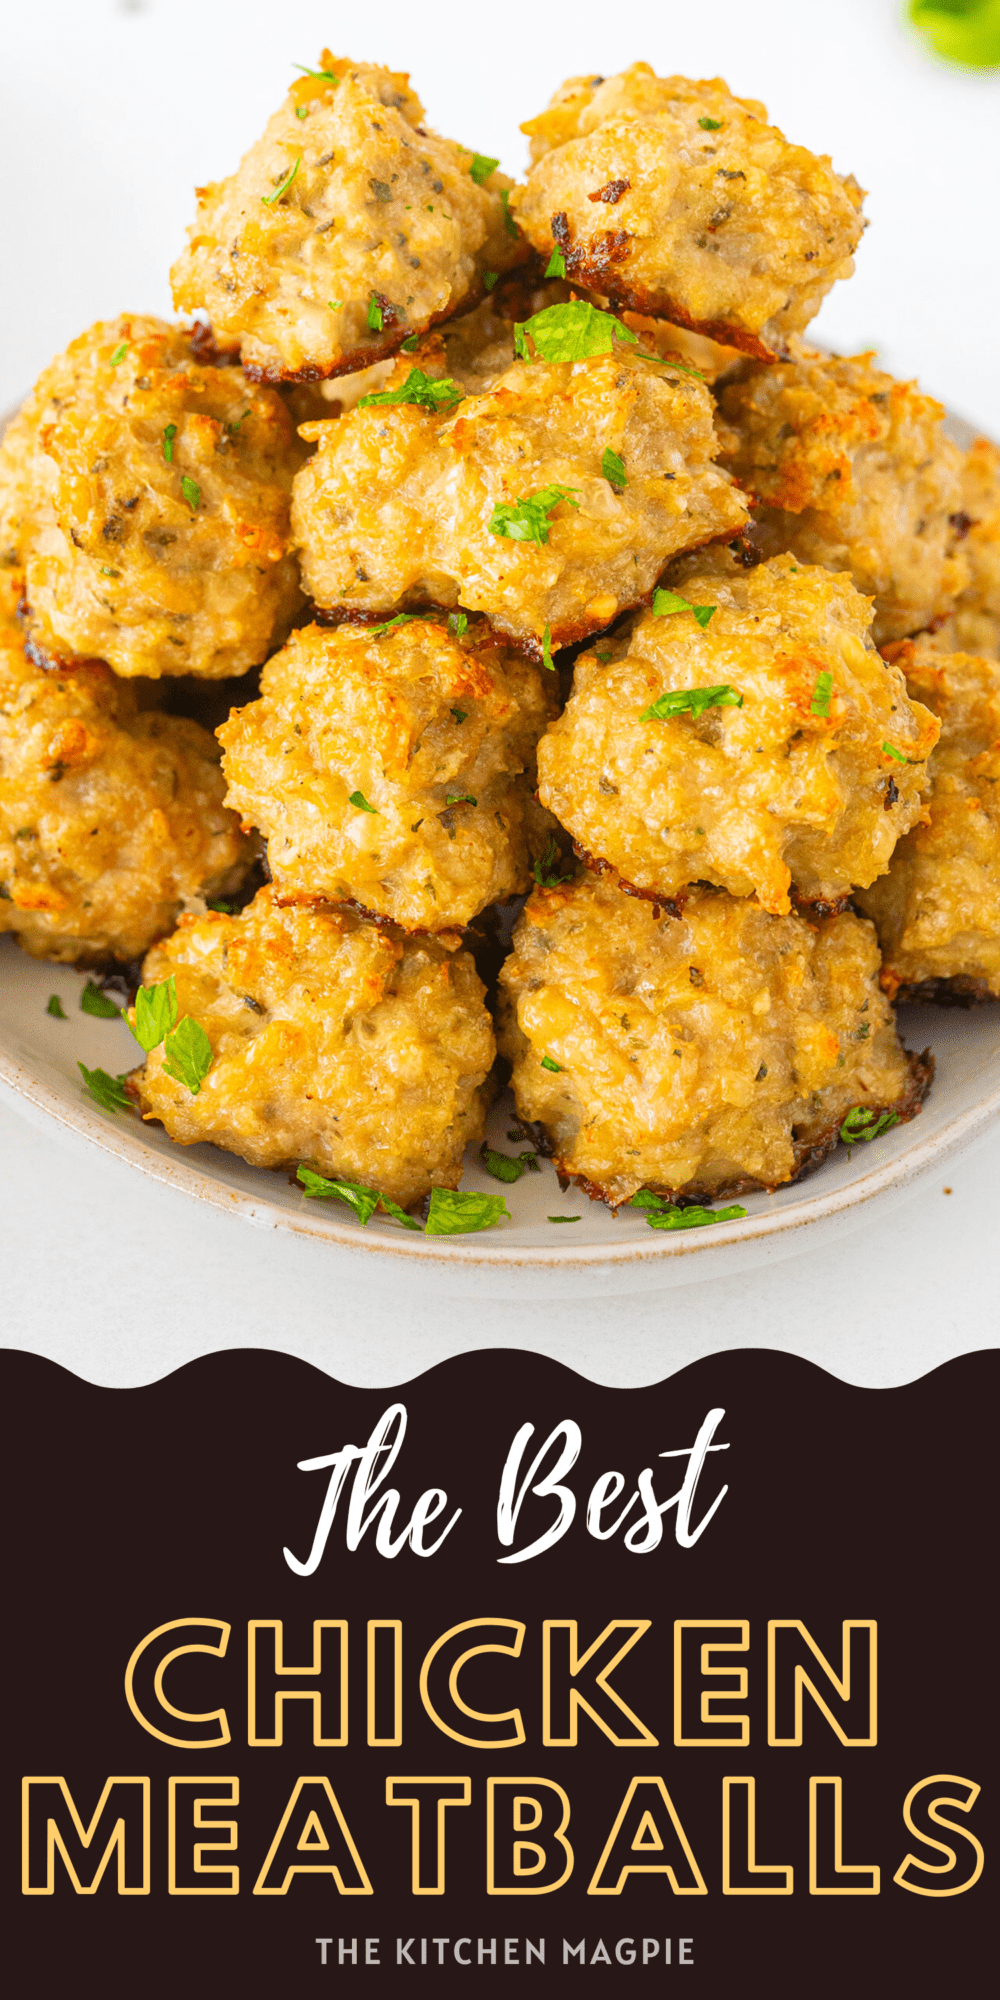 Easy, fast and juicy baked chicken meatballs to use with your favorite sauce or just as is! These are easy to freeze so you can triple the batch and do some meal prep!